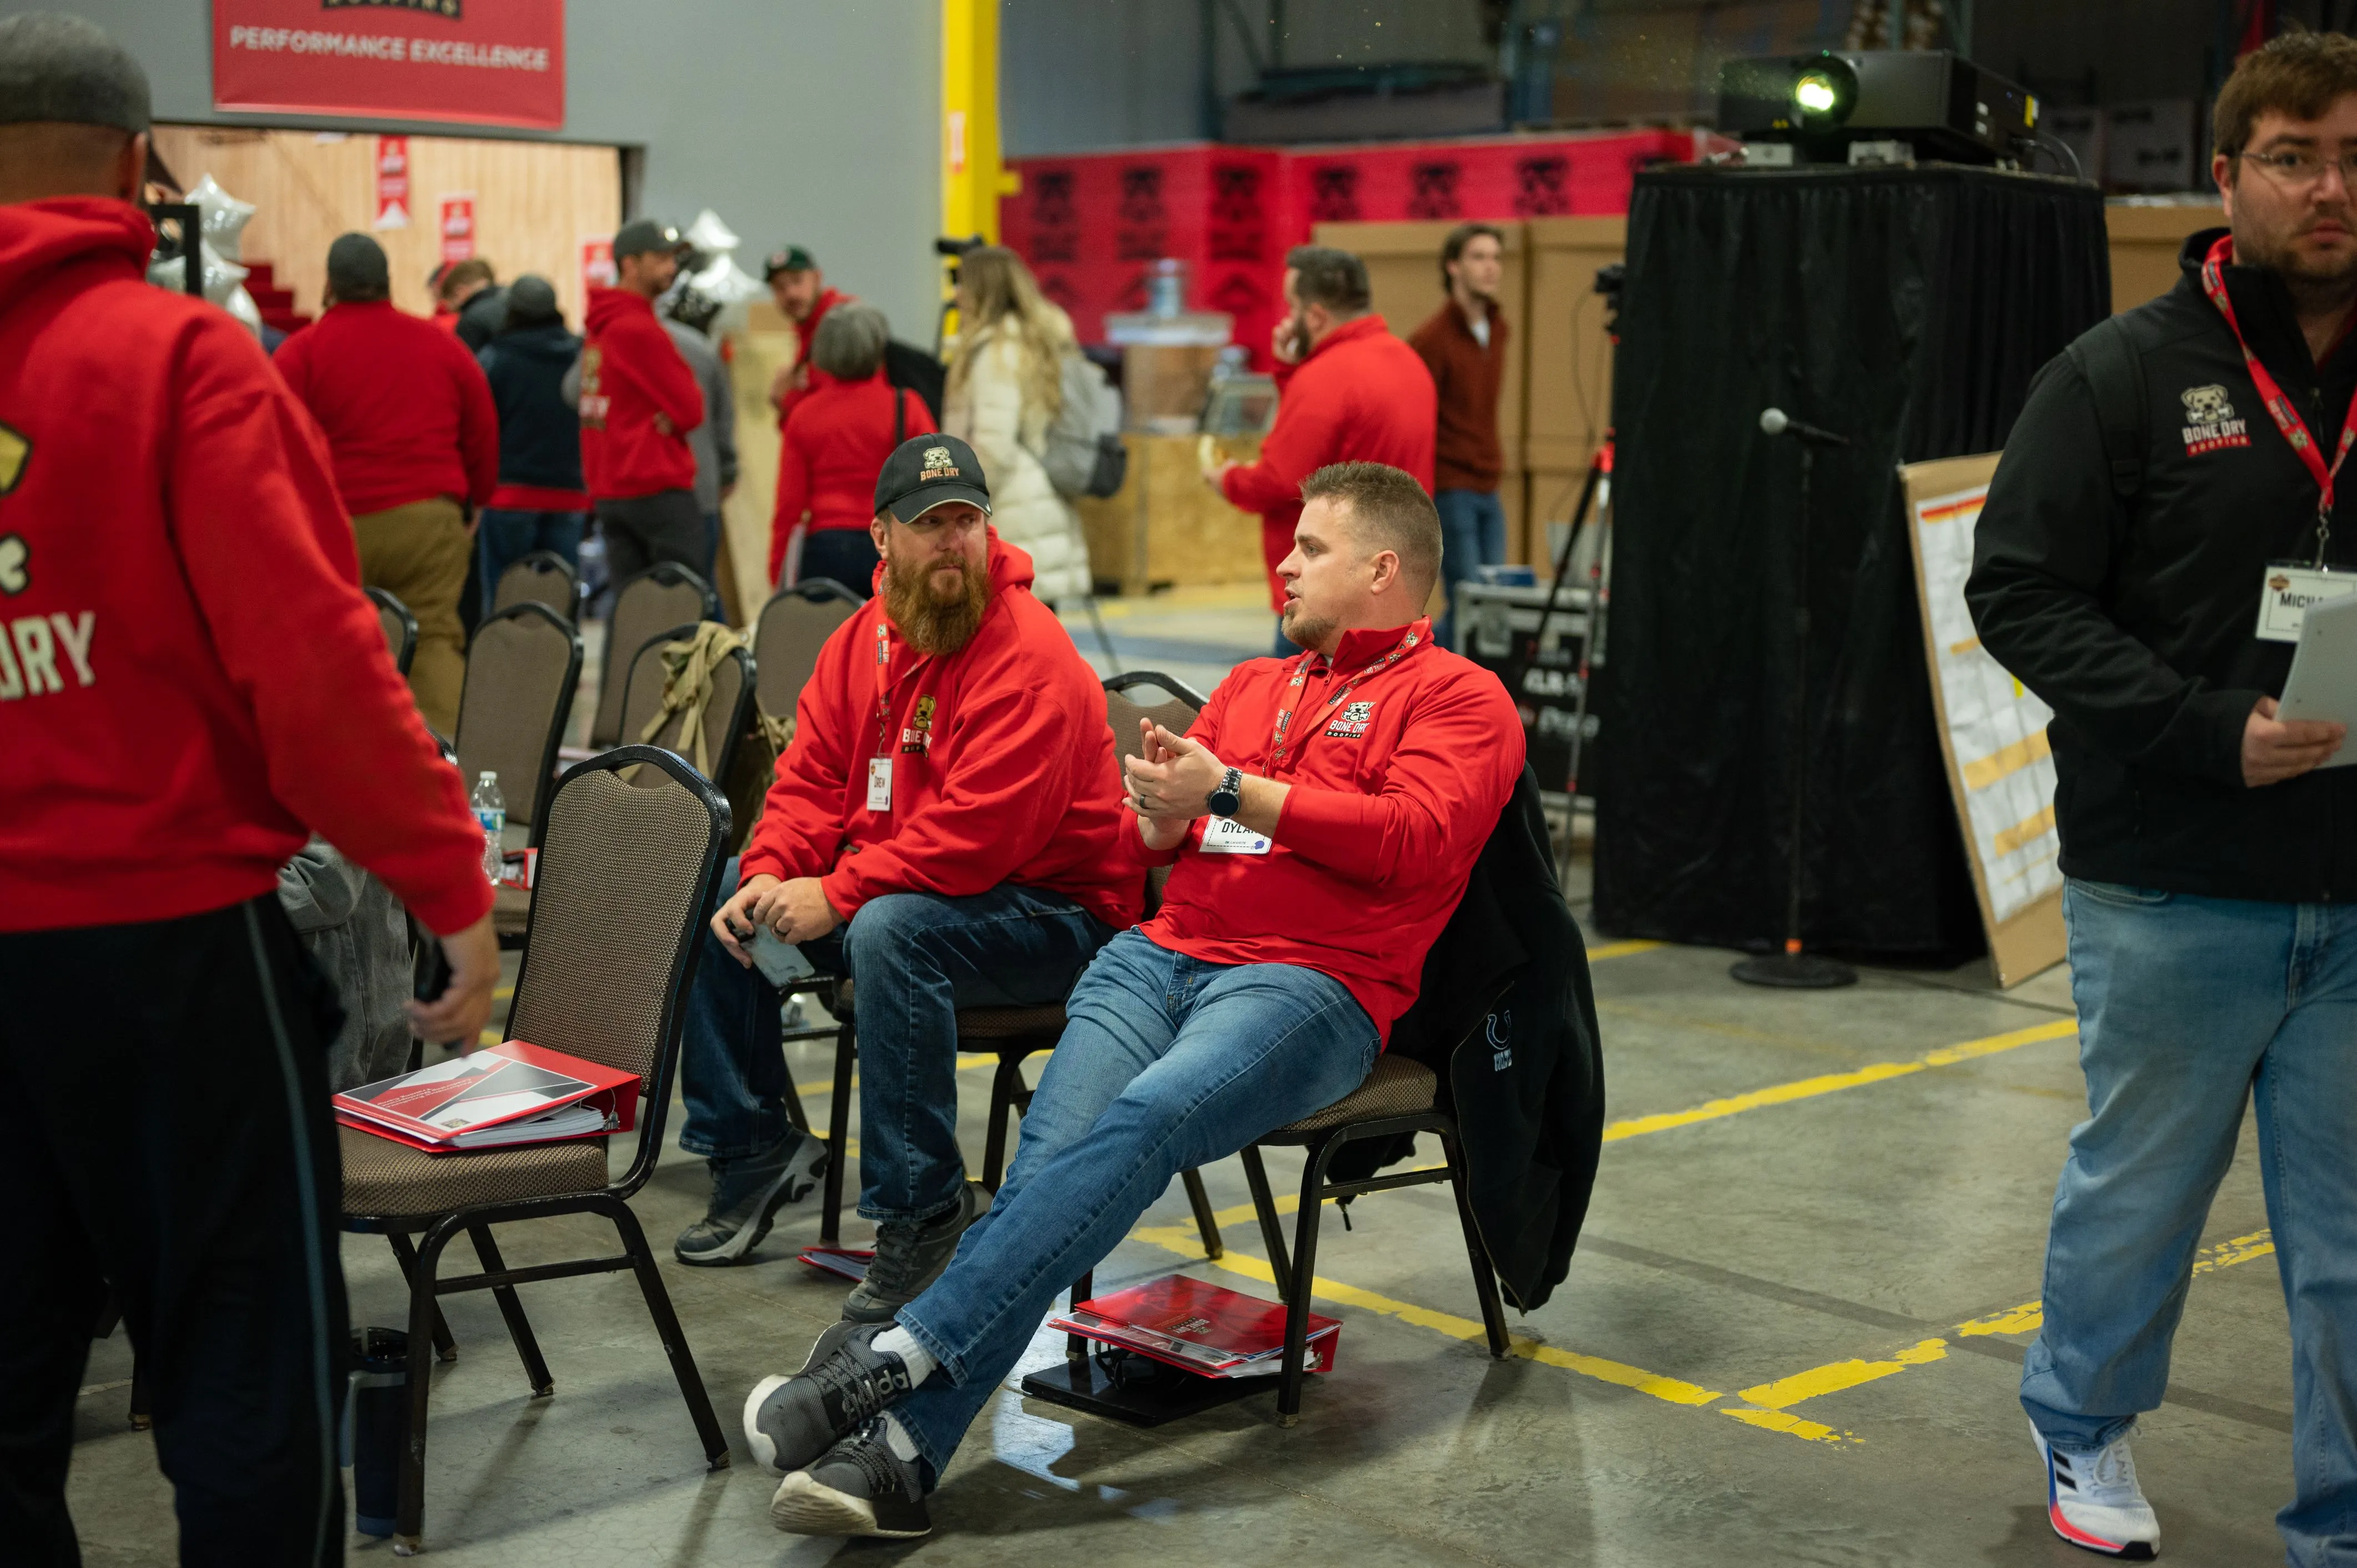 People wearing red tops at a busy indoor event with some sitting and one person using a mobile phone.